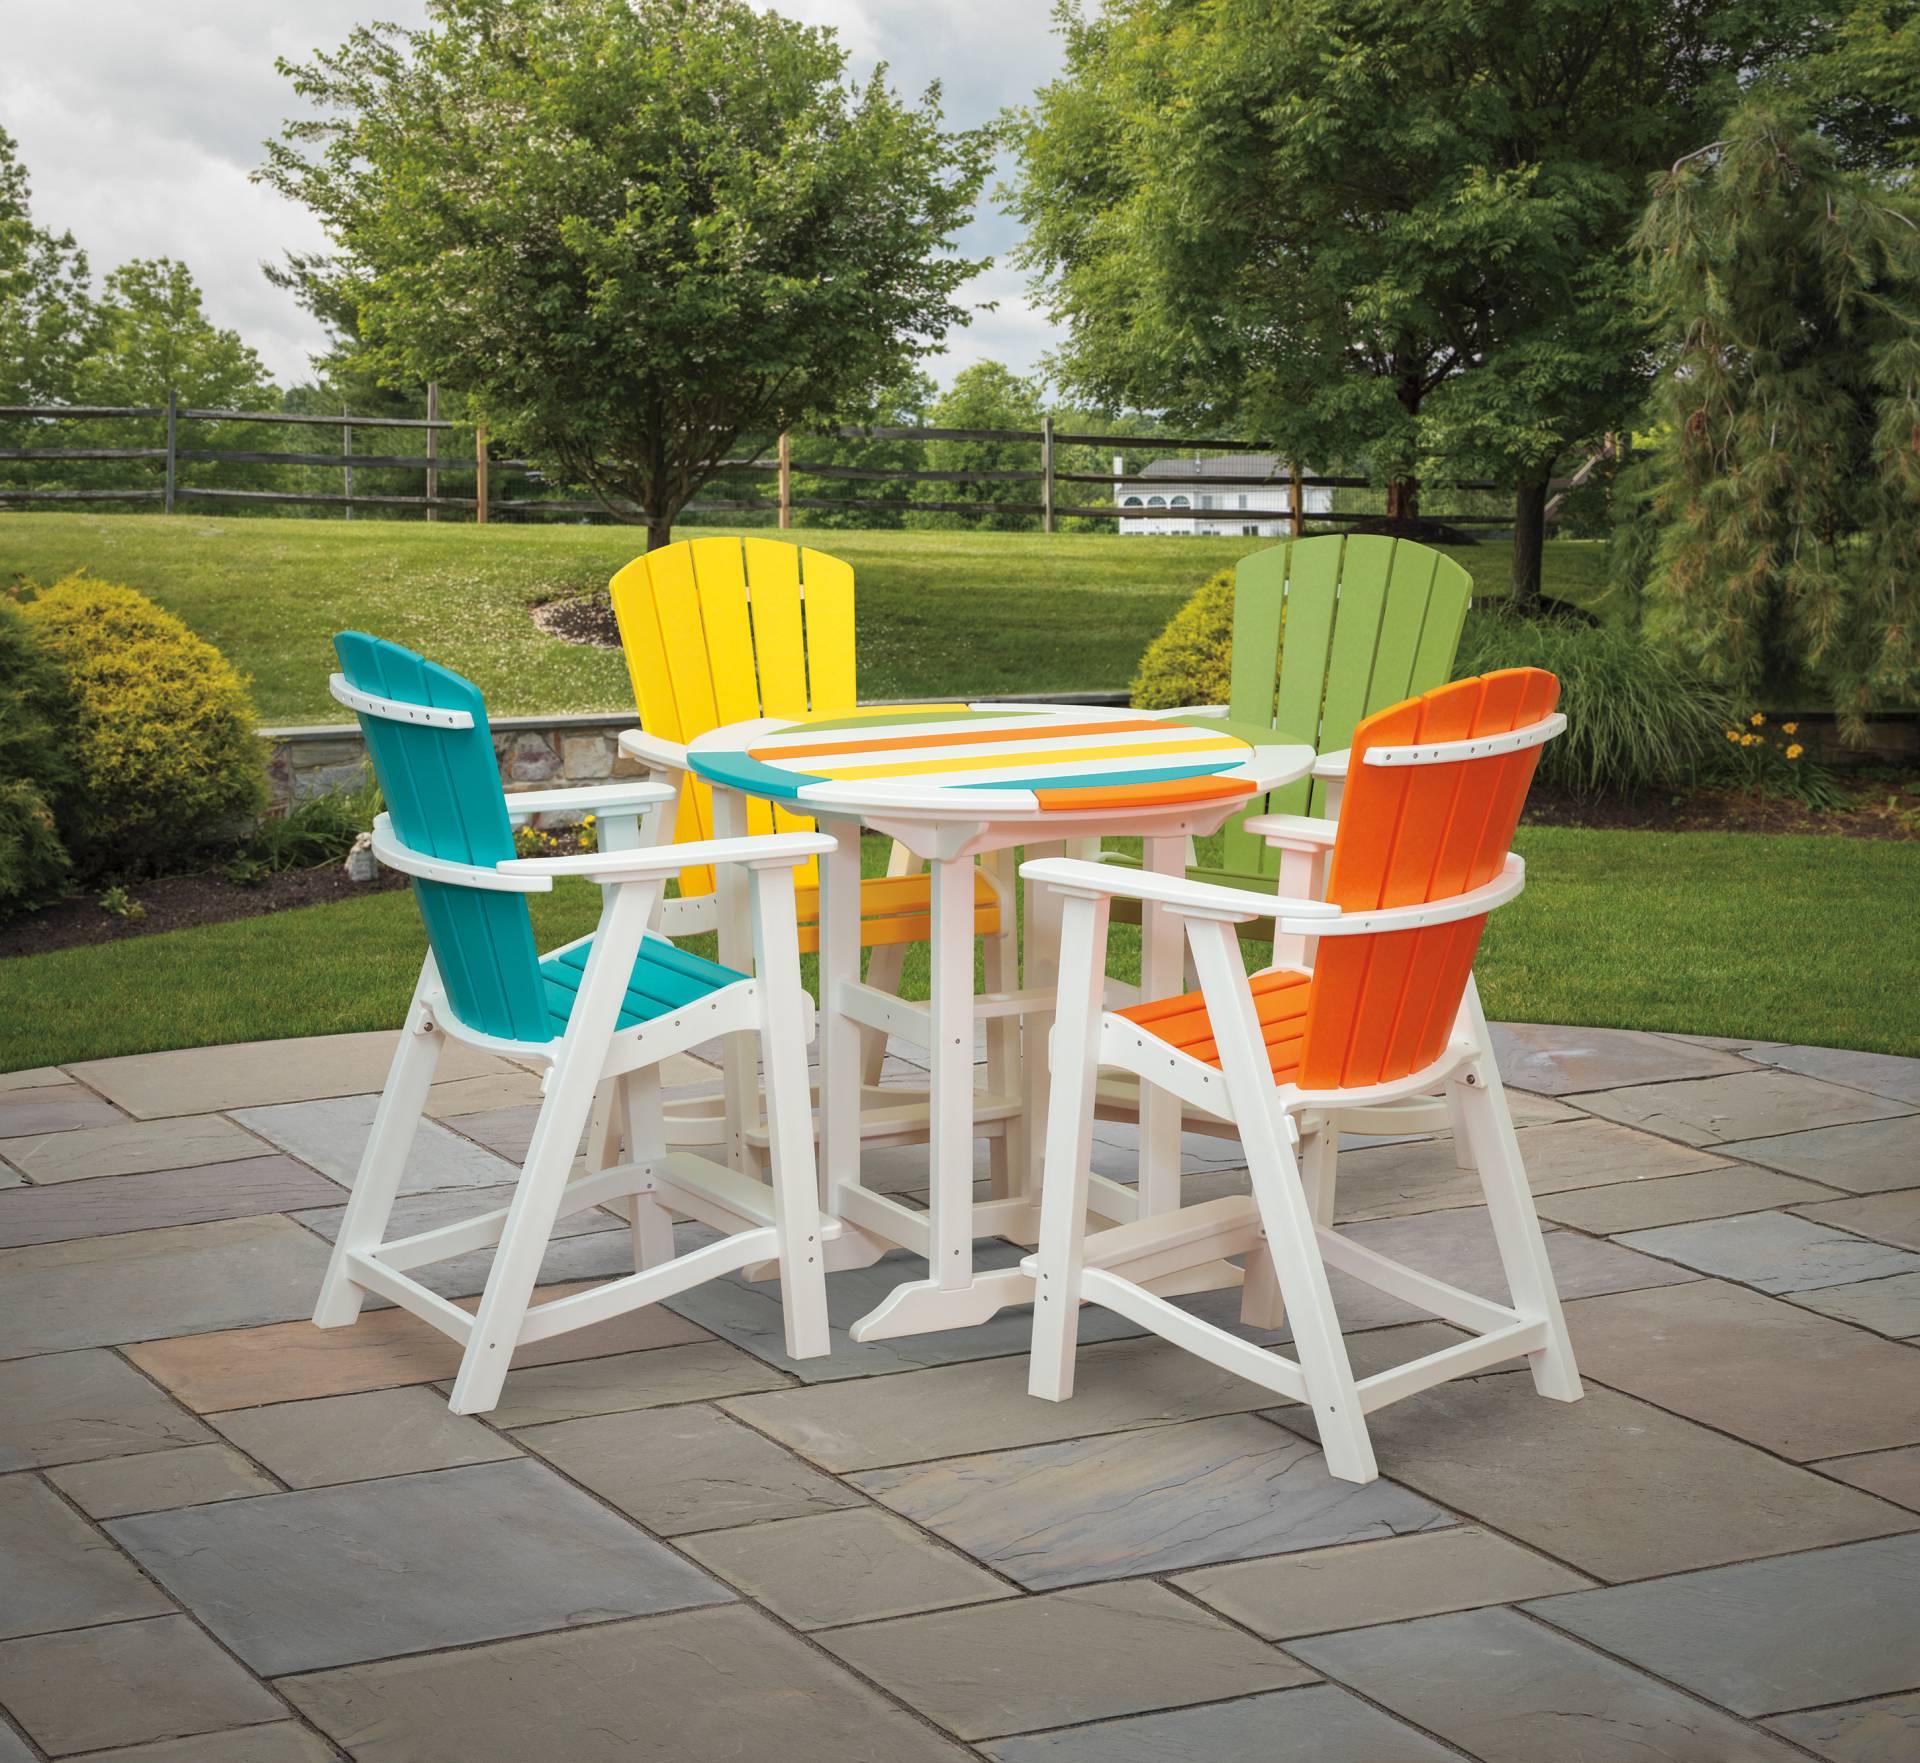 Patio Furniture for Sale